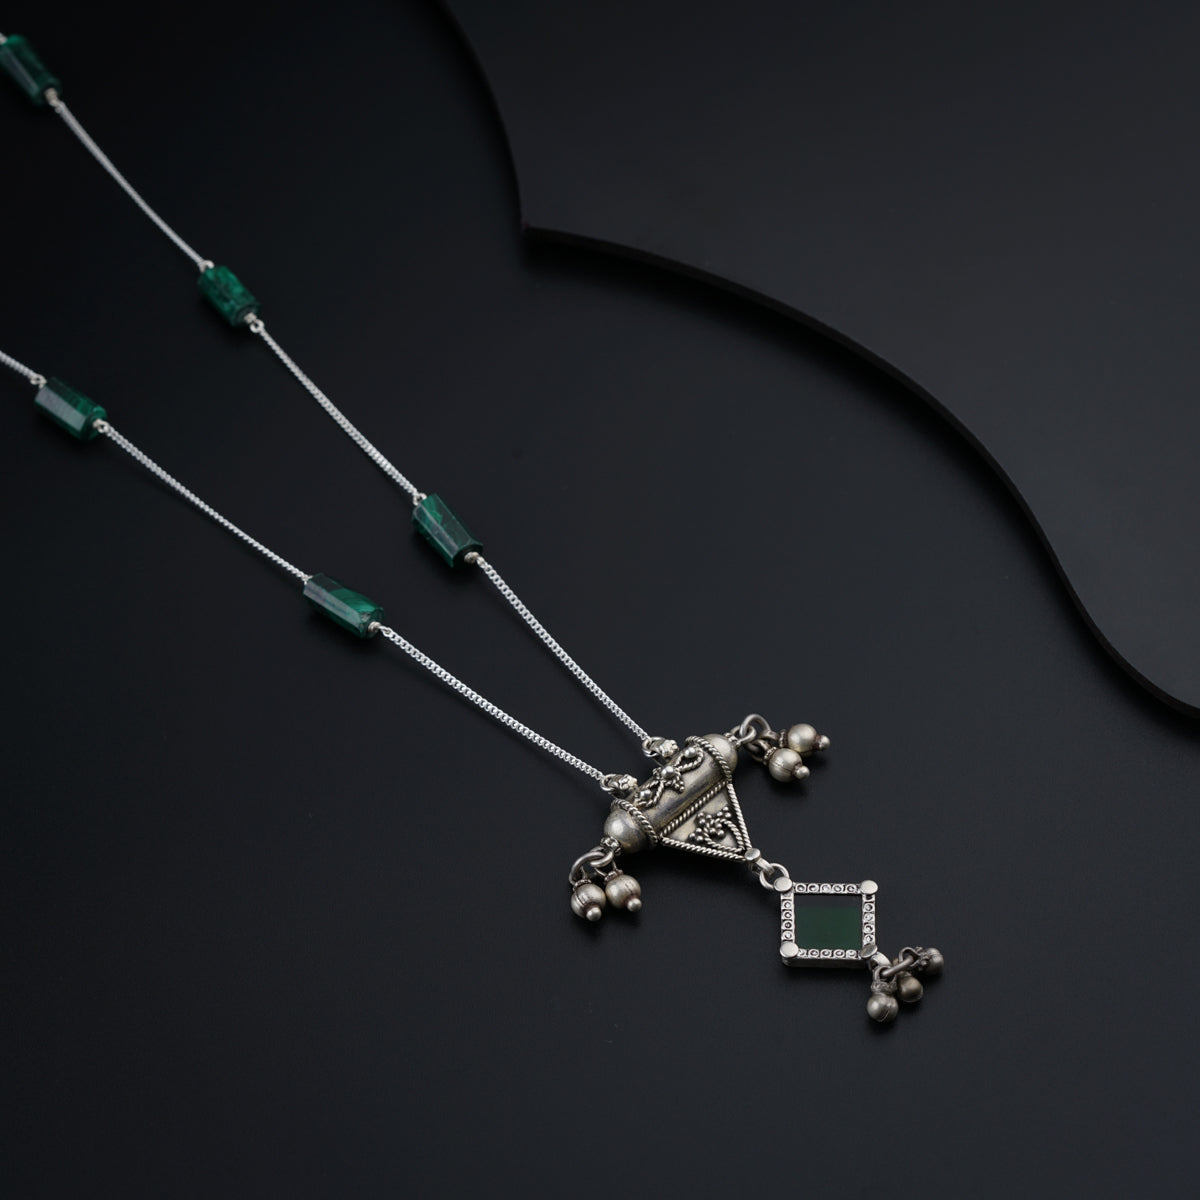 Antique Silver Necklace with Malachite Stones